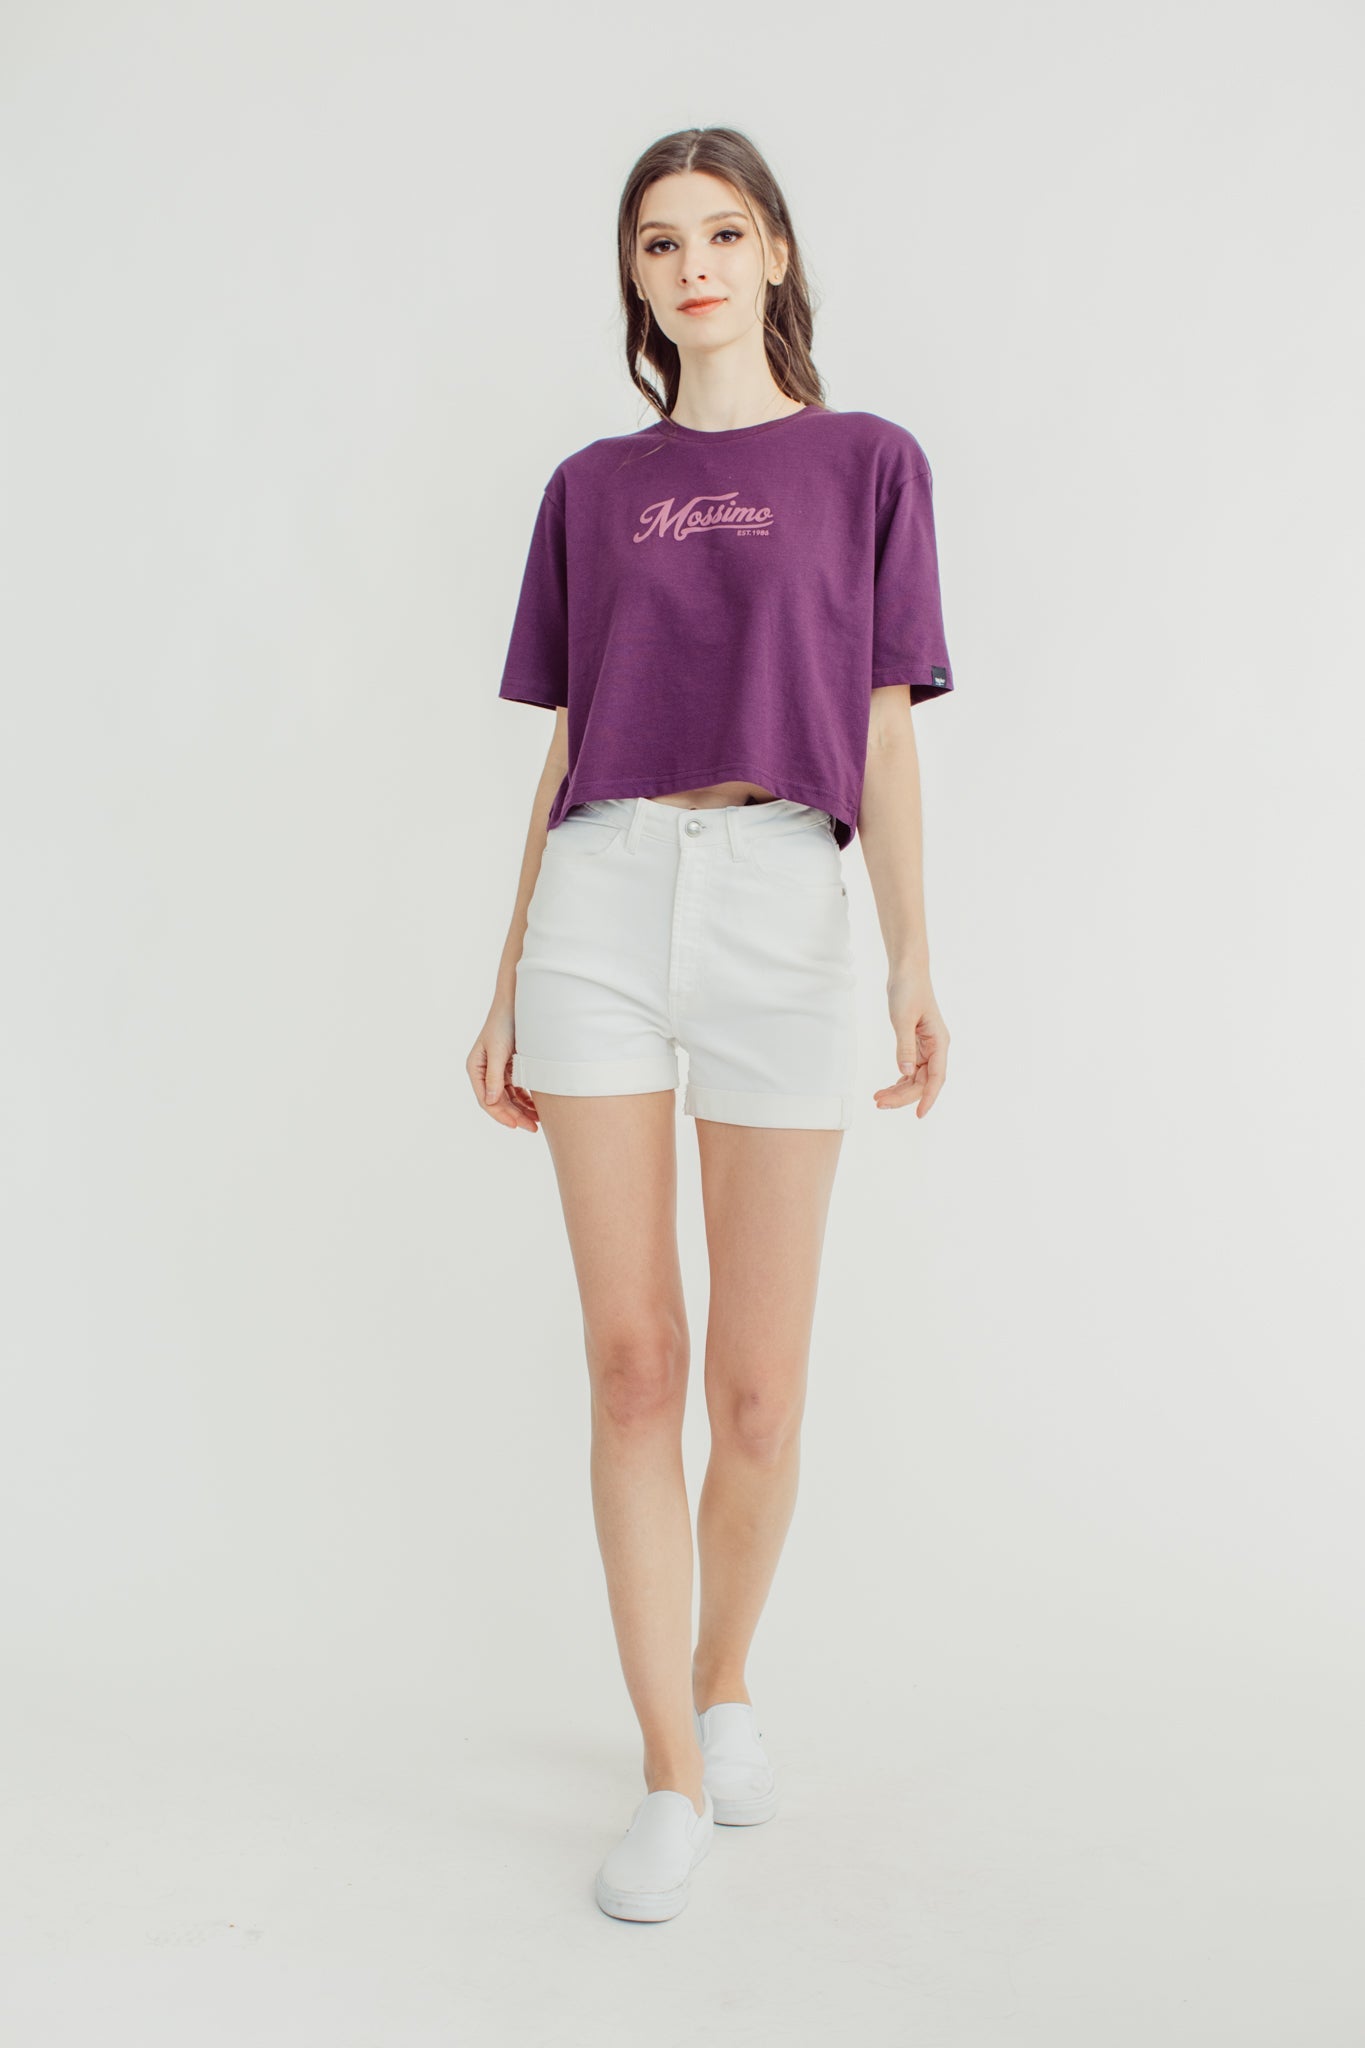 Potent Purple with Mossimo Script High Density Modern Cropped Fit Tee - Mossimo PH